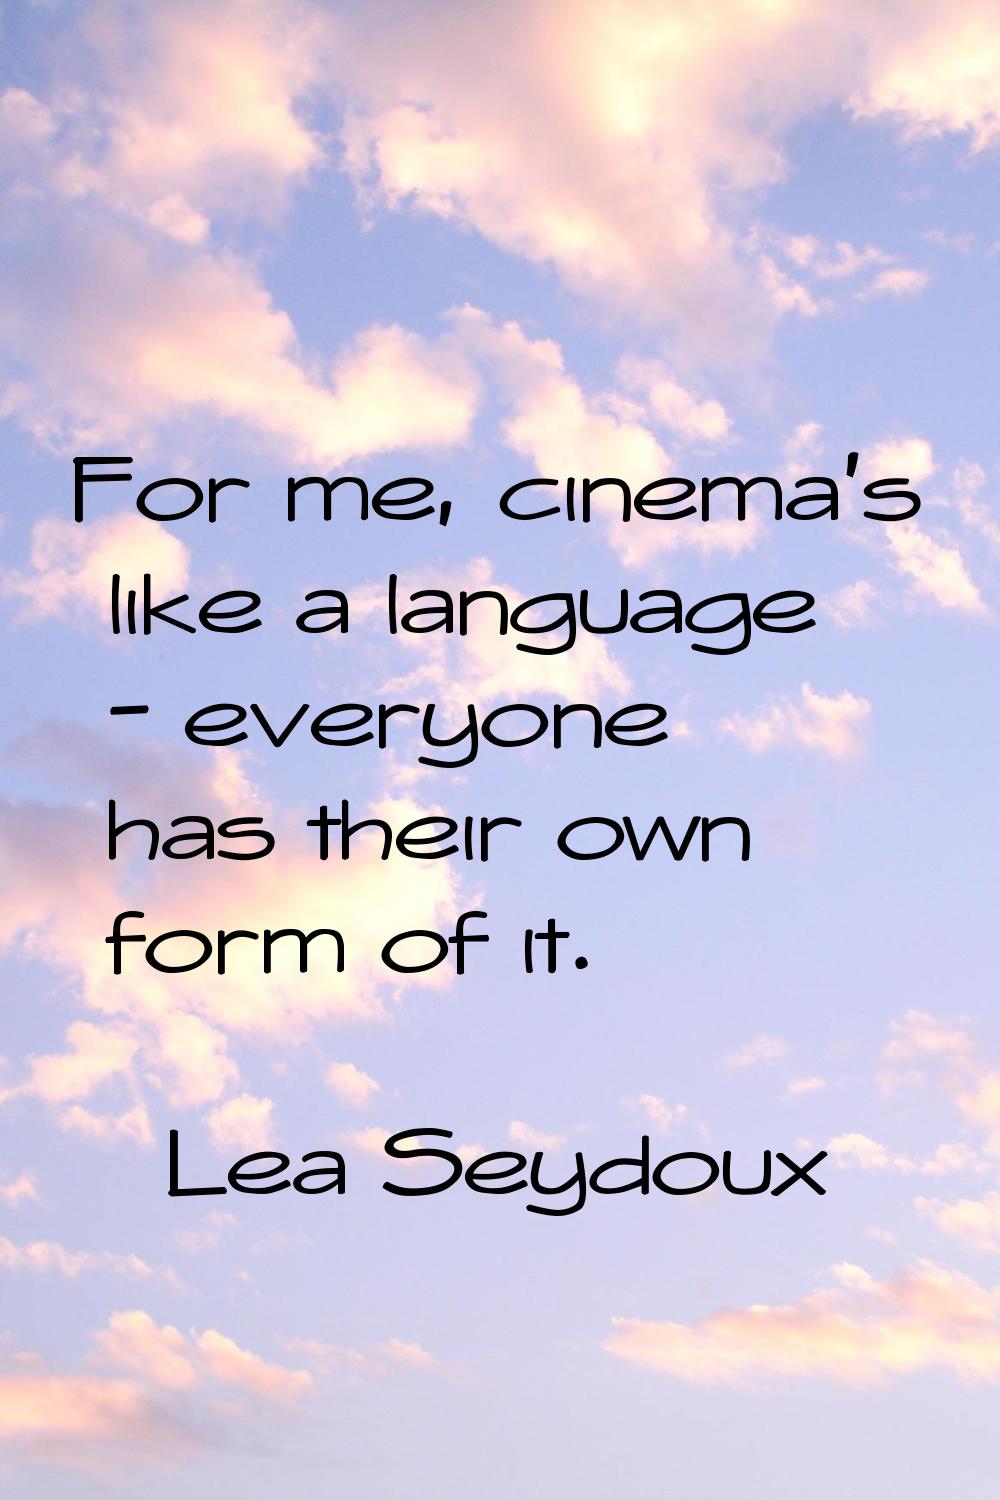 For me, cinema's like a language - everyone has their own form of it.